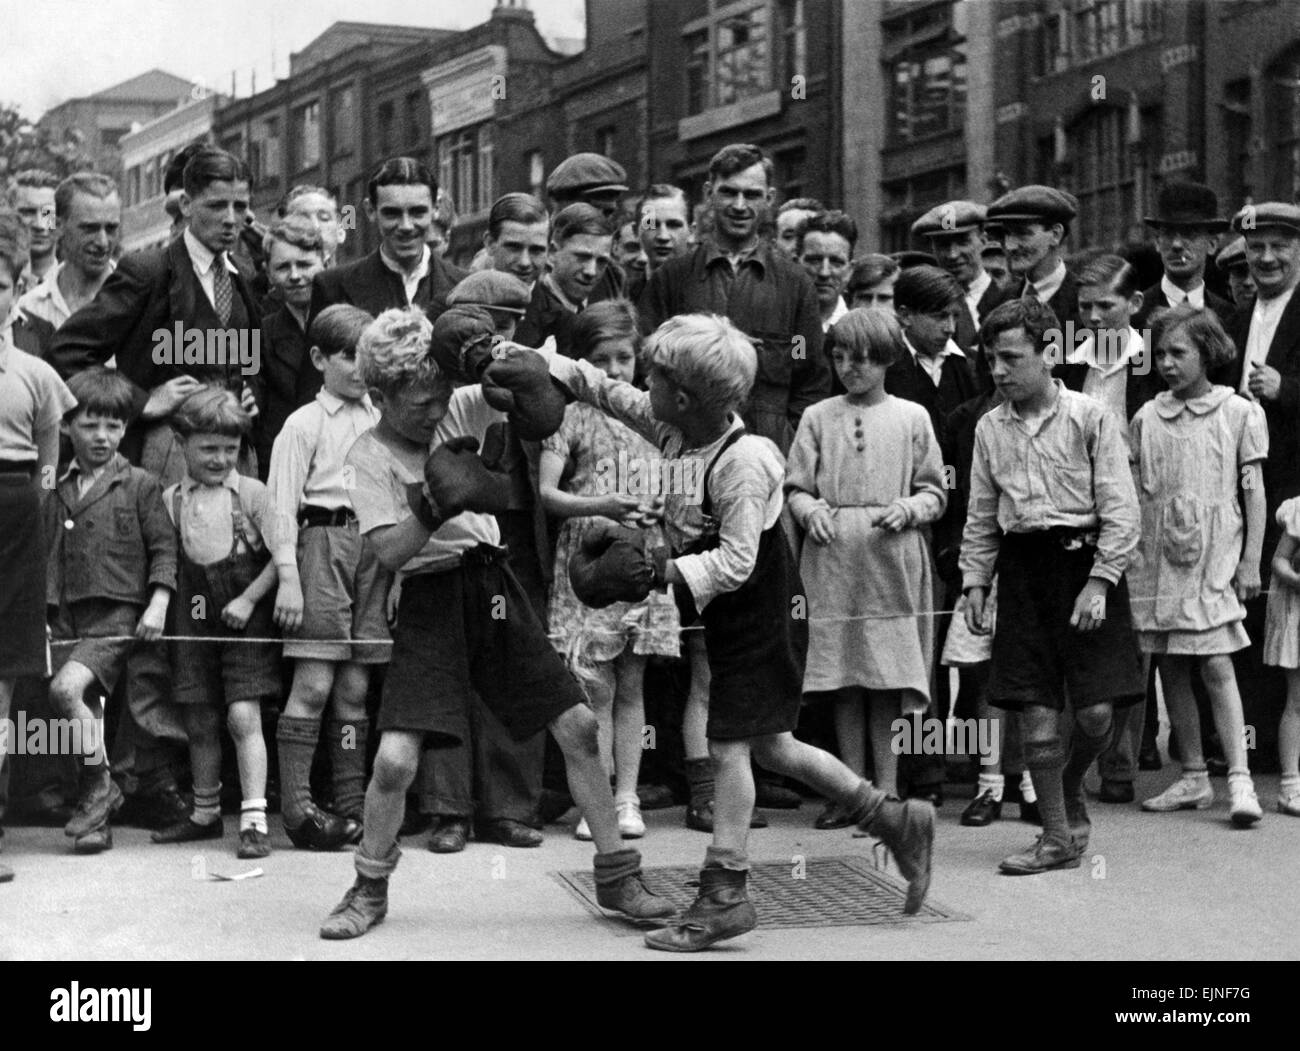 Boxing match in the street at Clerkenwell Green, a company of little boys arranged a boxing match. They set up a ring with a cord. After the performance they collected money (pennies) from the large crowd which was attracted. The boys have performances of several fights. July 1936 Stock Photo